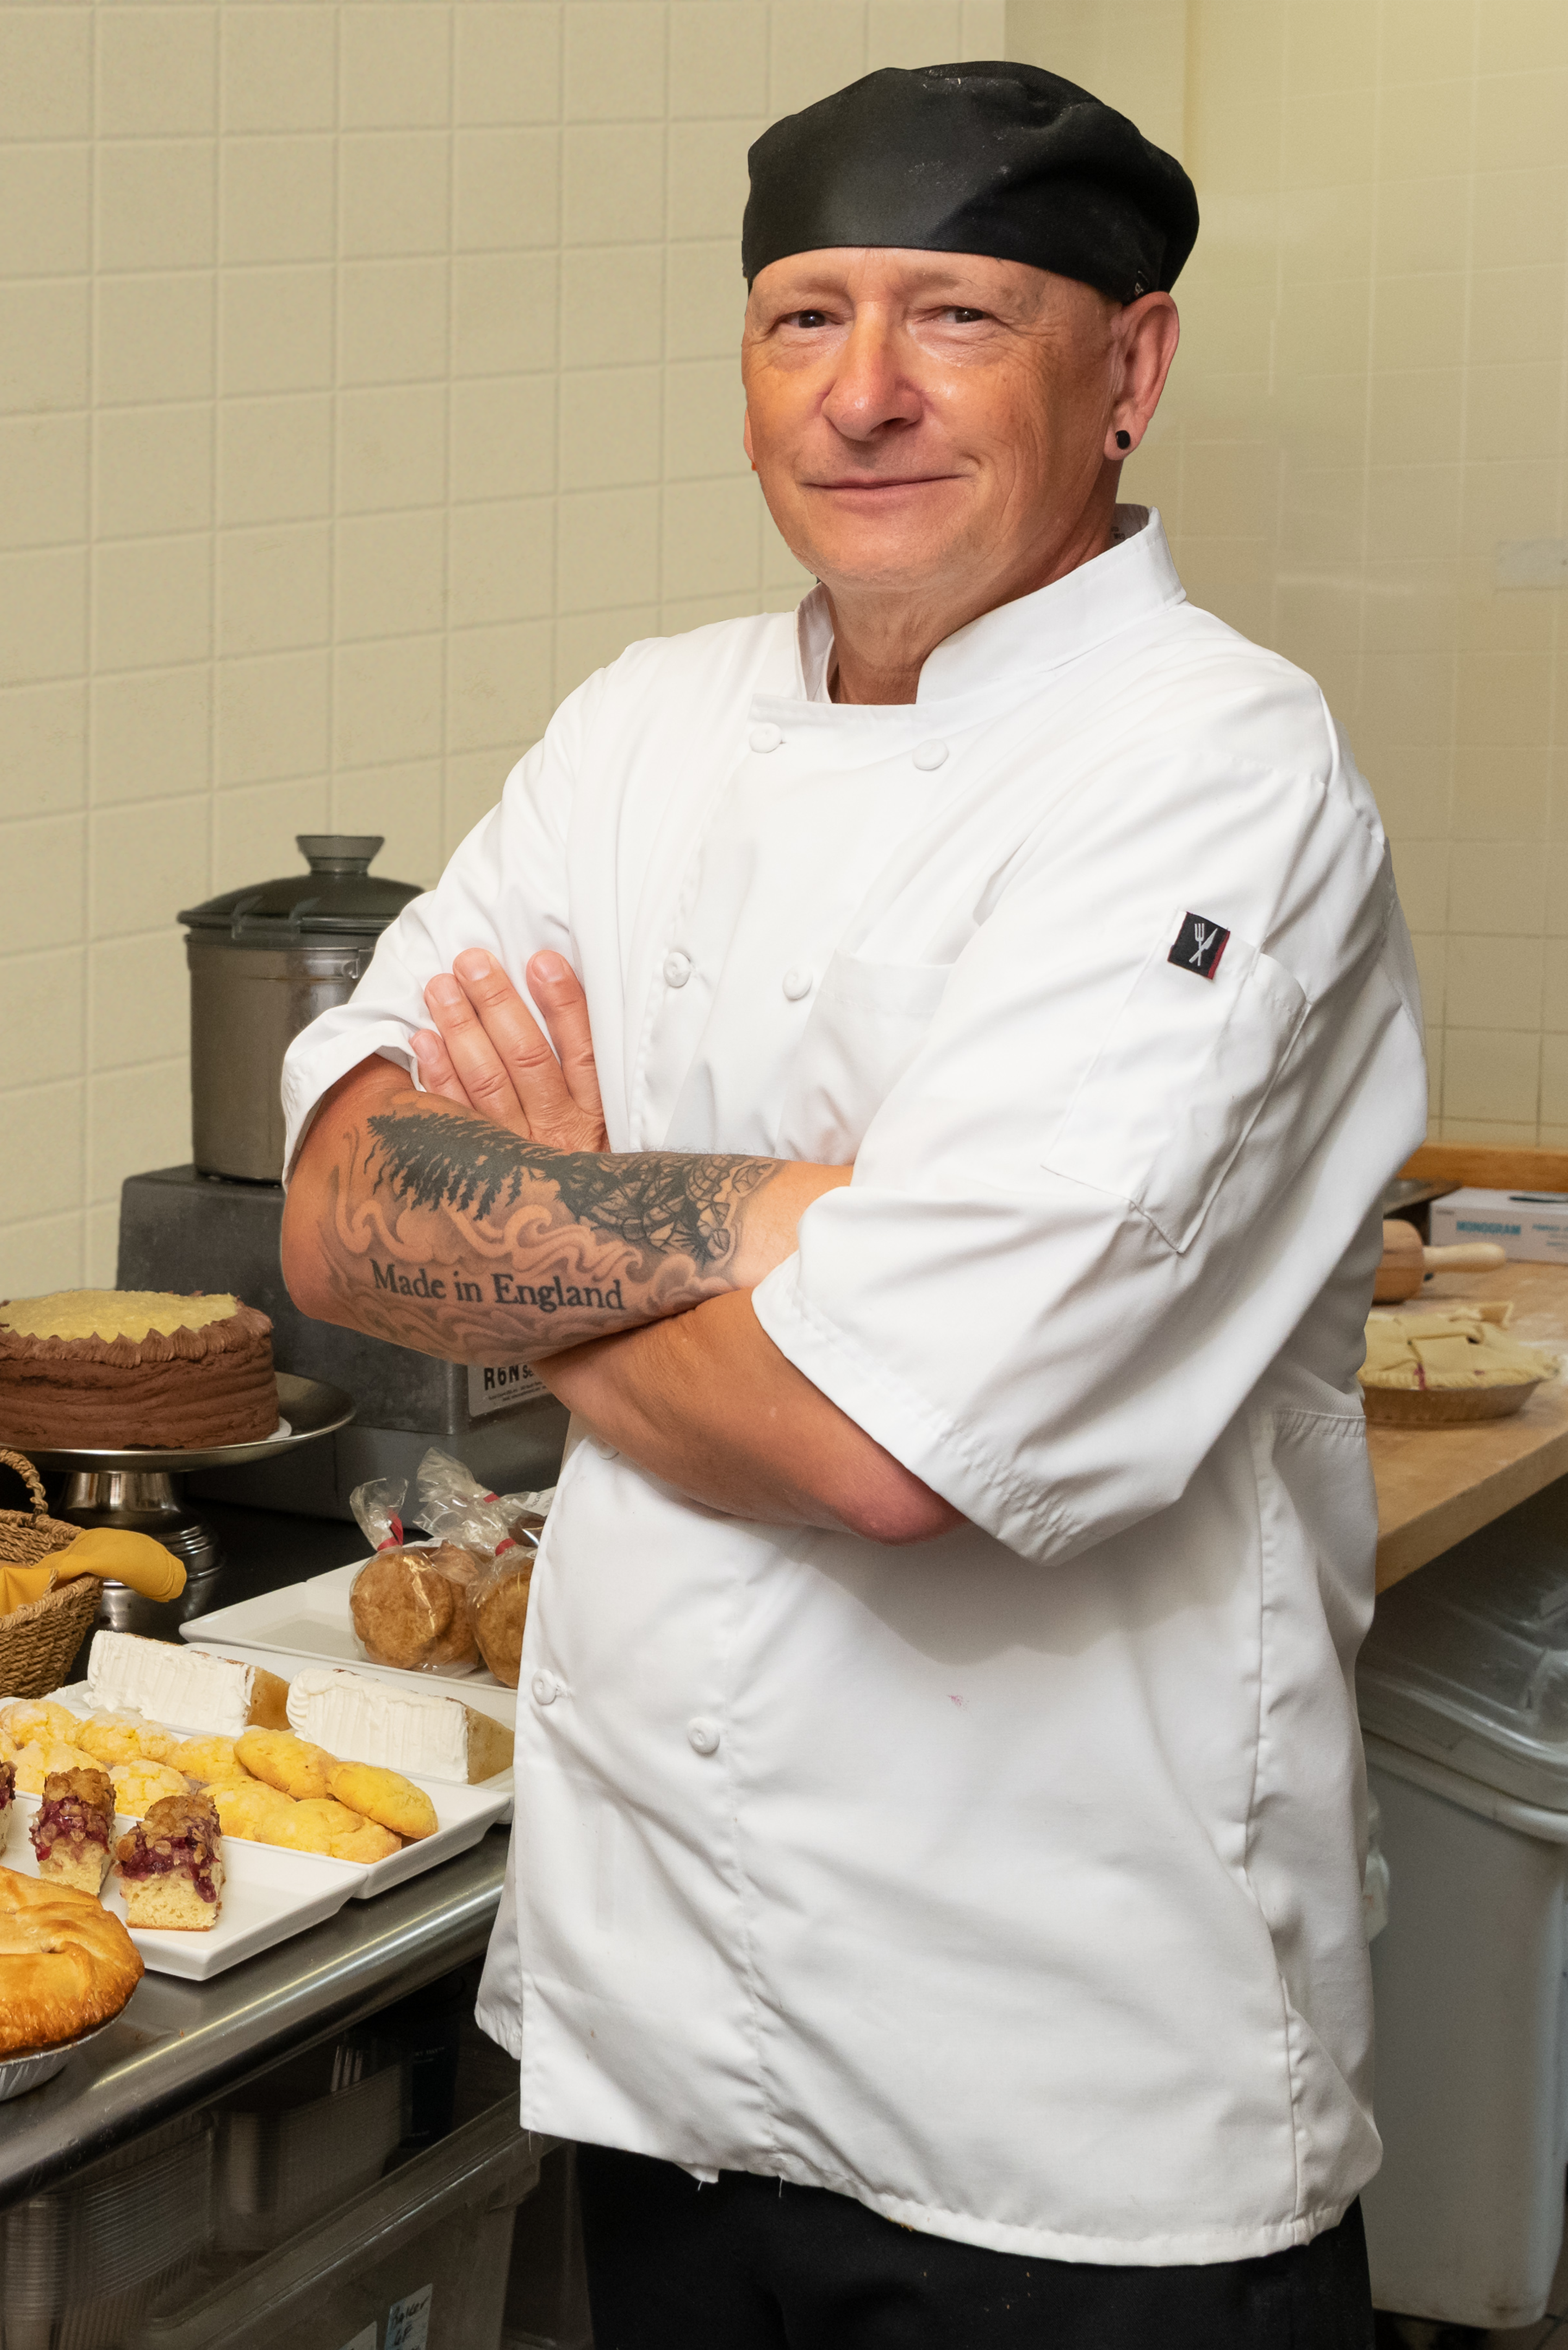 Robin Flower, Laurel Parc's Executive Chef, posing and smiling for a photo in front of a kitchen counter full of pastries.